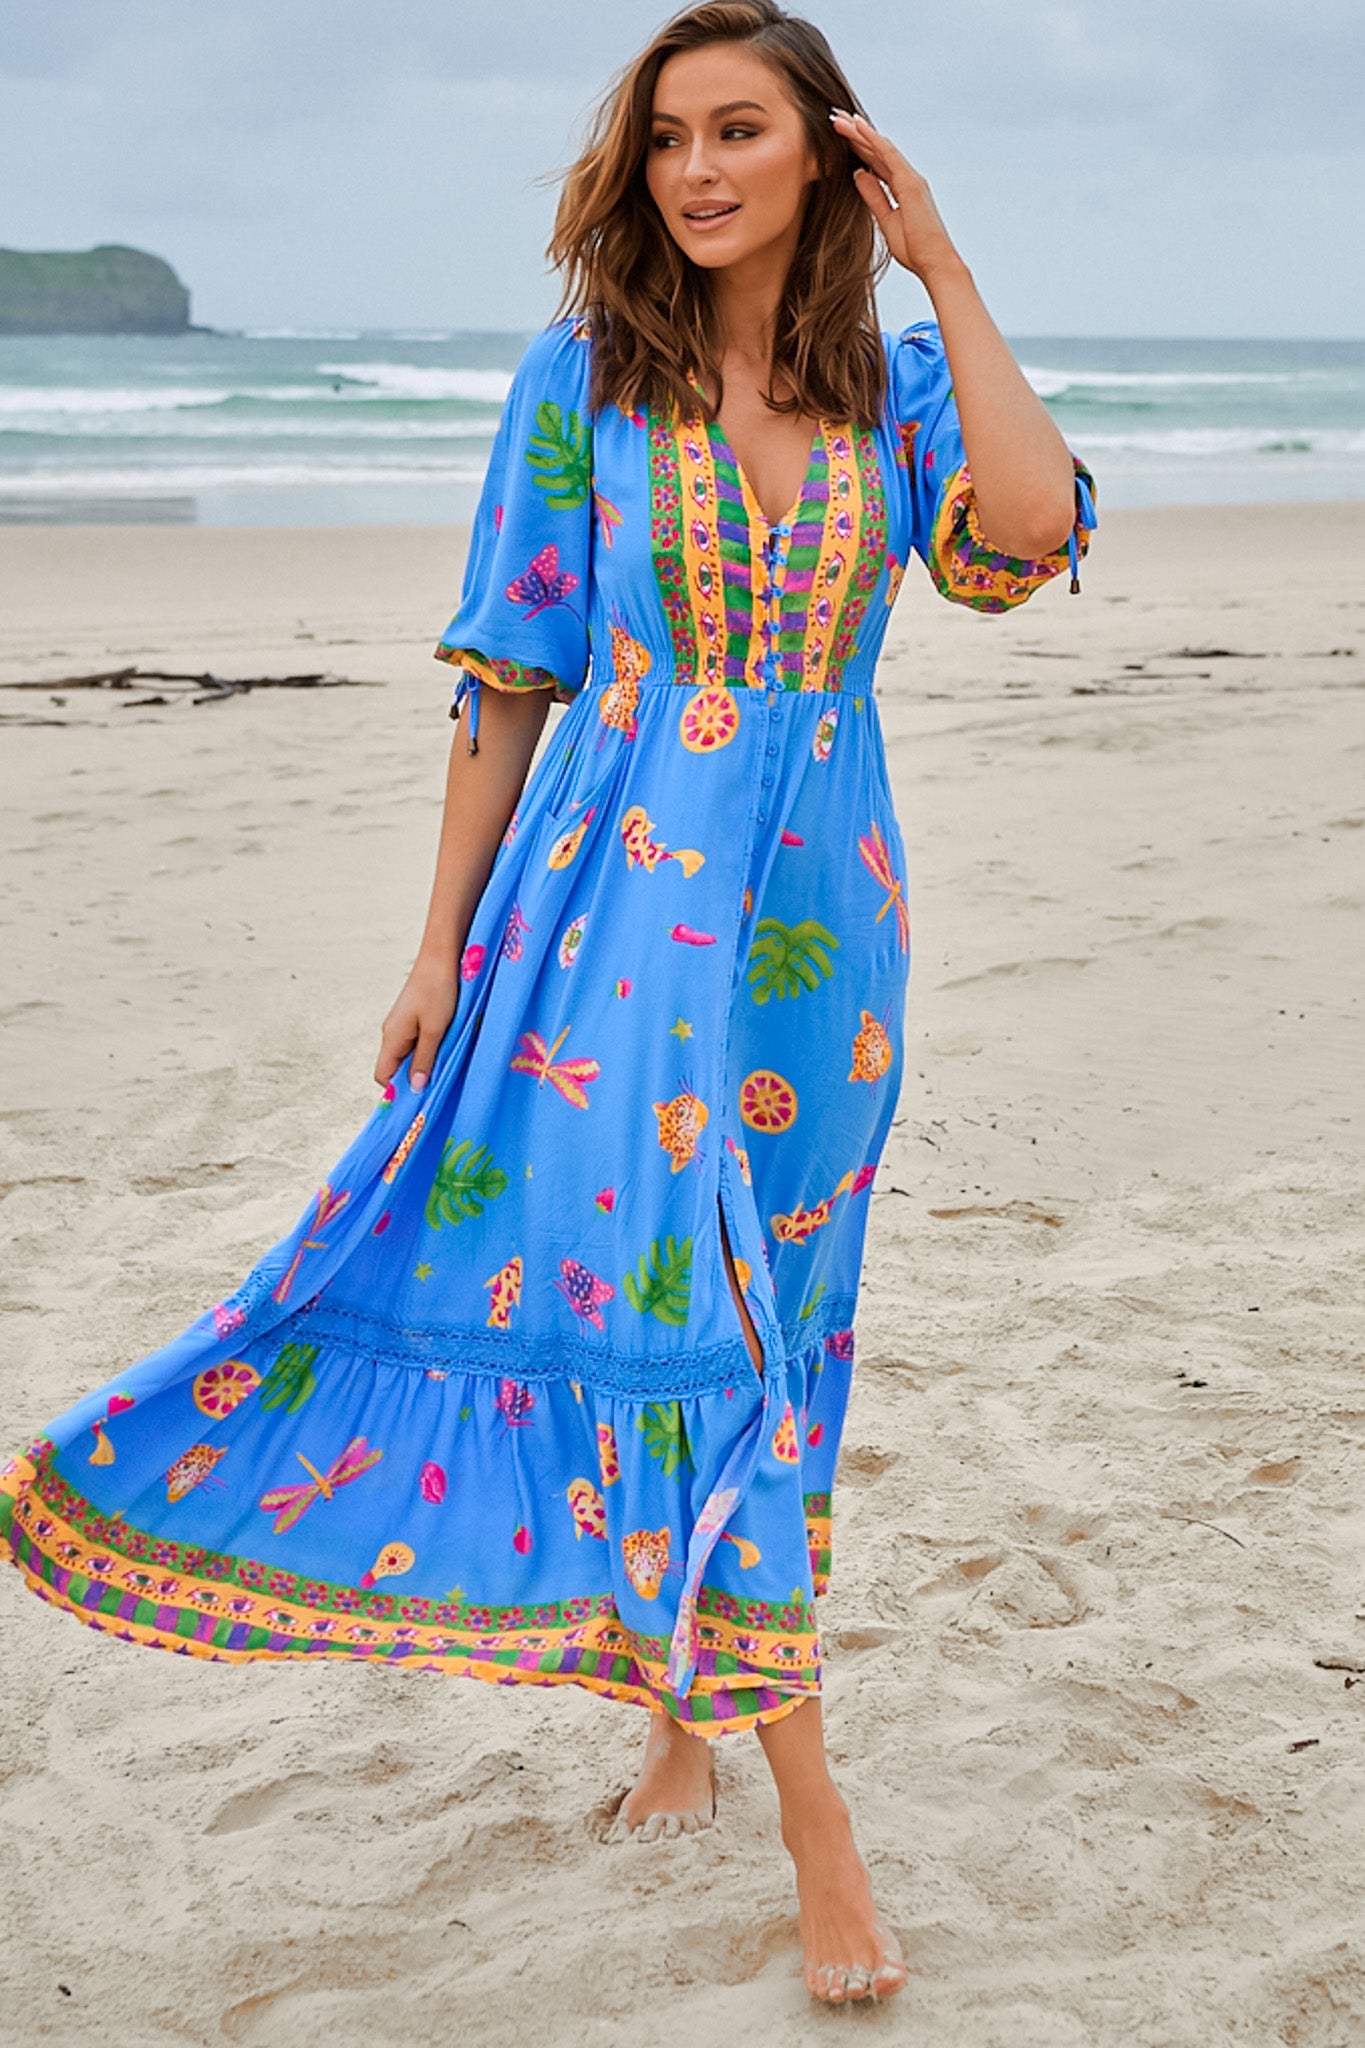 JAASE - Molli Maxi Dress: Button Down A-Line Dress with Tied Sleeves in Mati Print